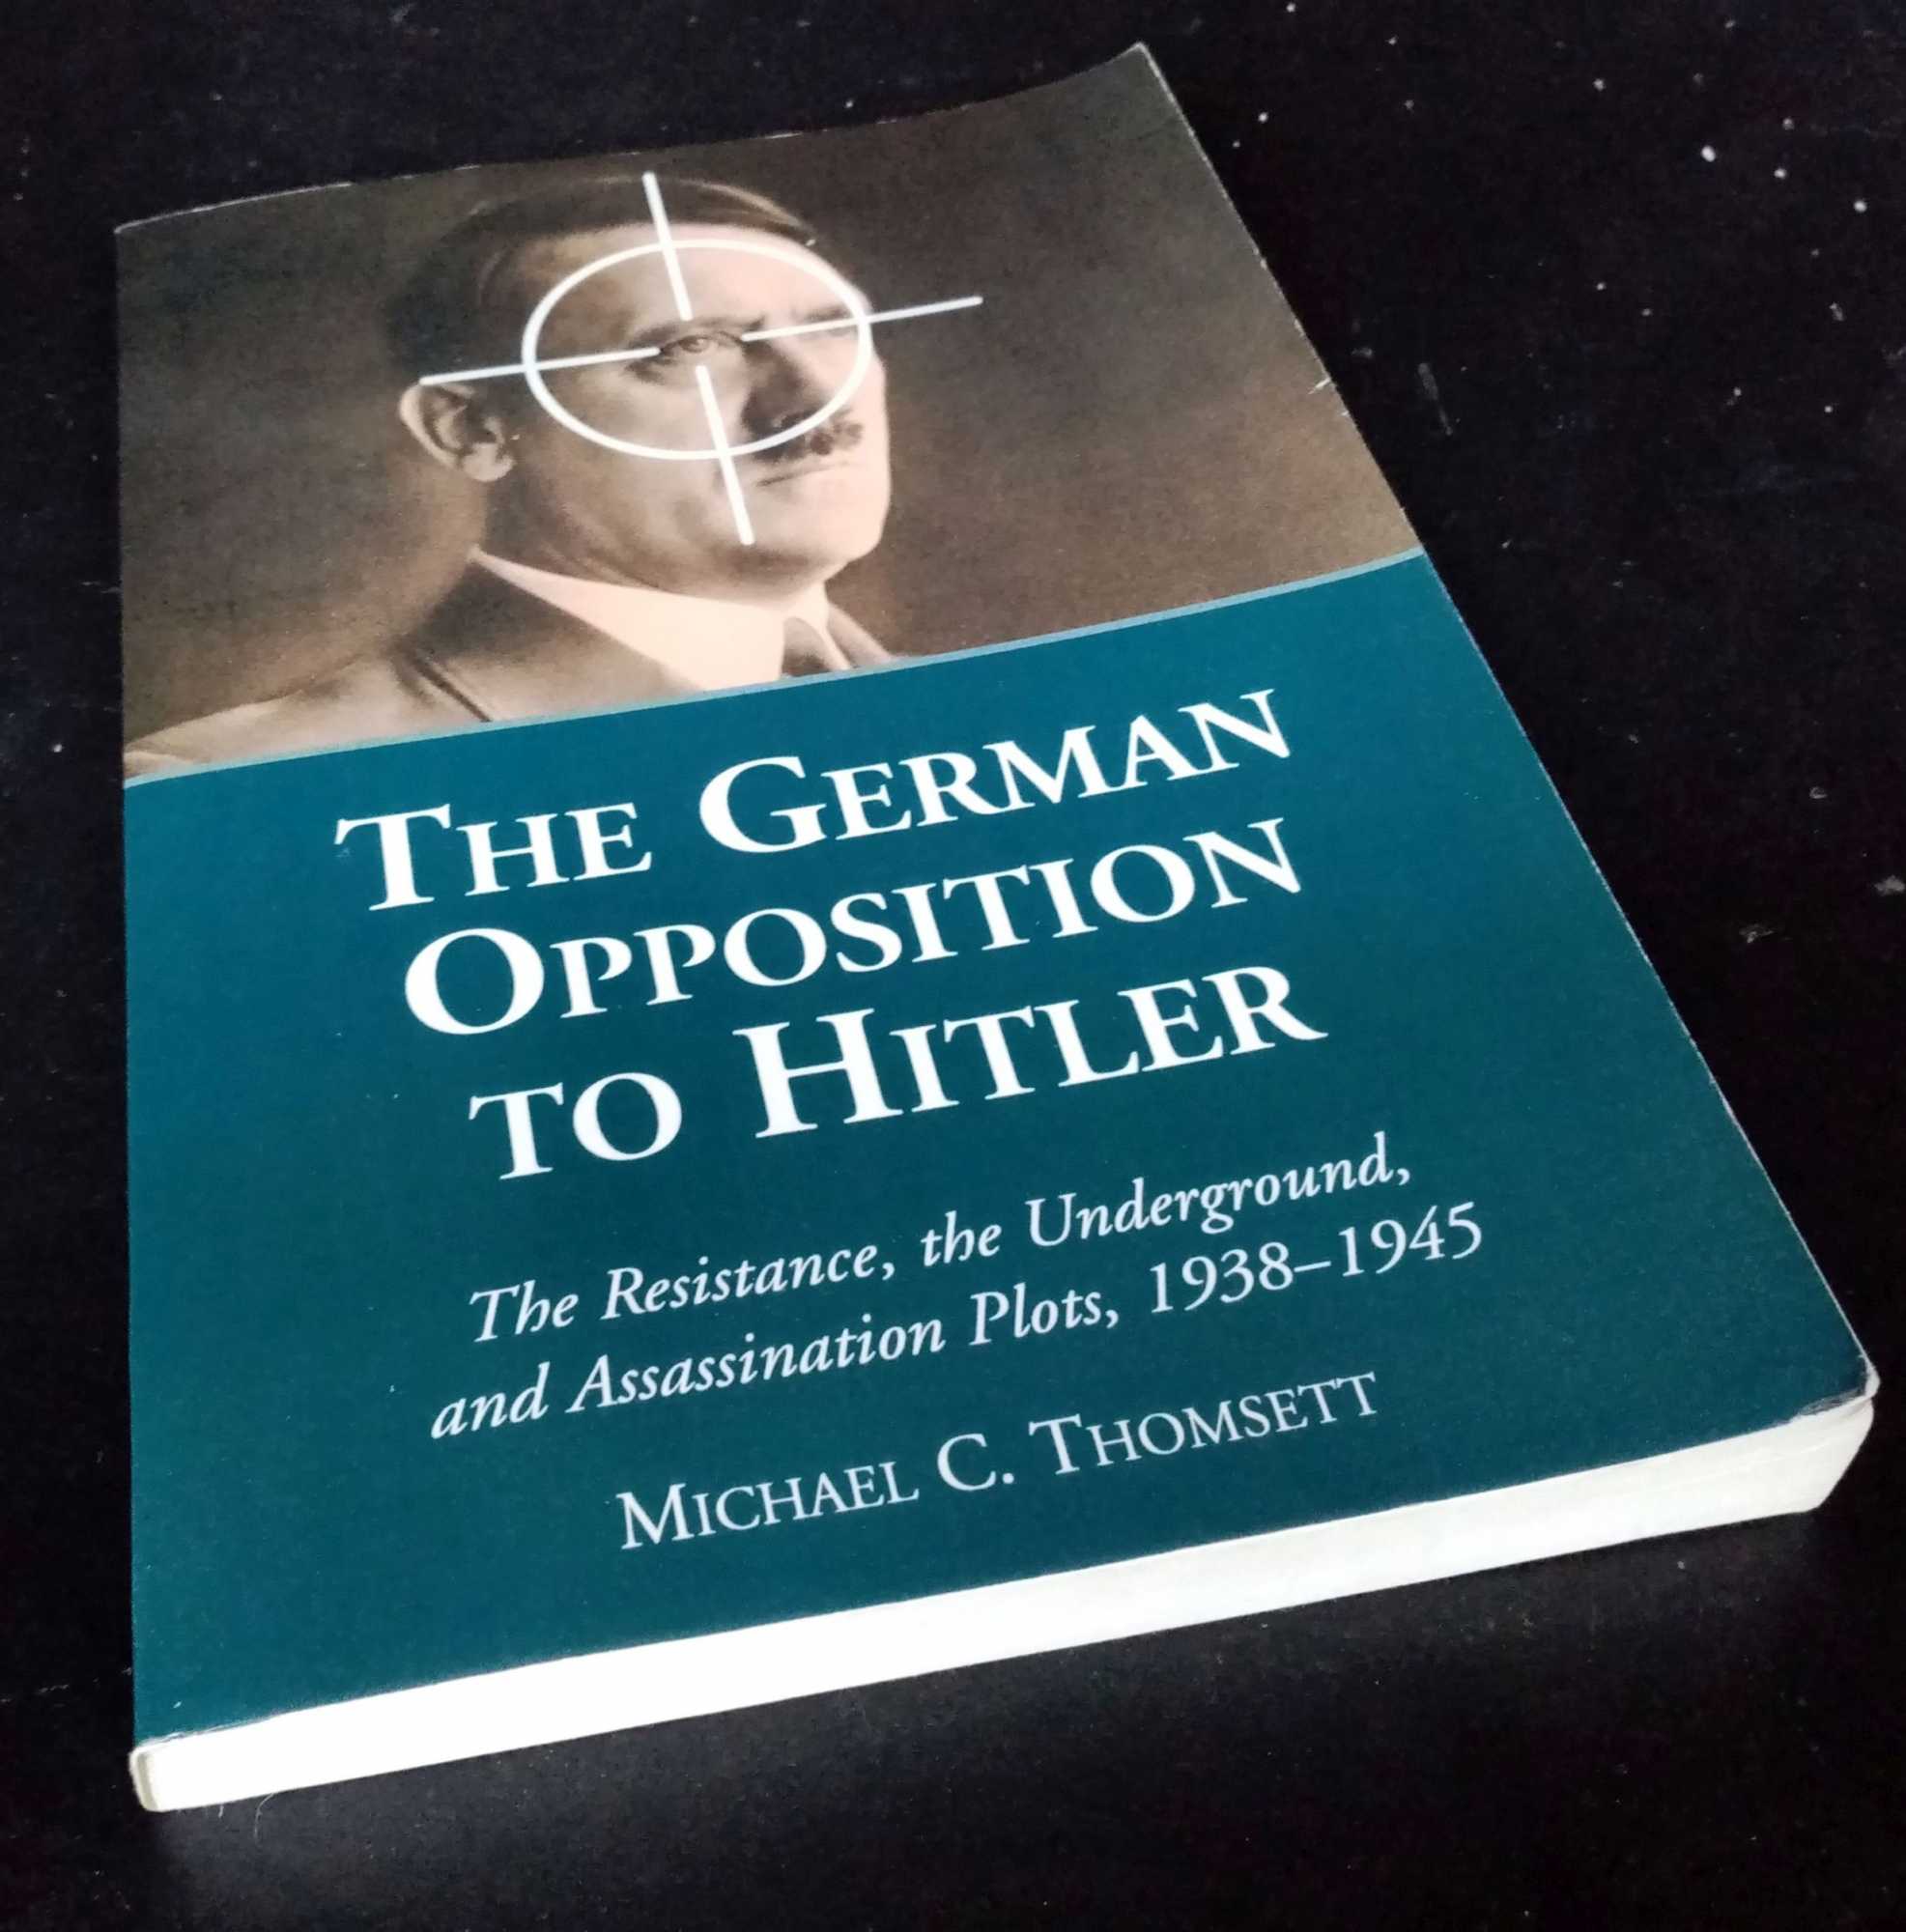 Michael Thomsett - The German Opposition to Hitler: The Resistance, the Underground, and Assassination Plots, 1938-1945